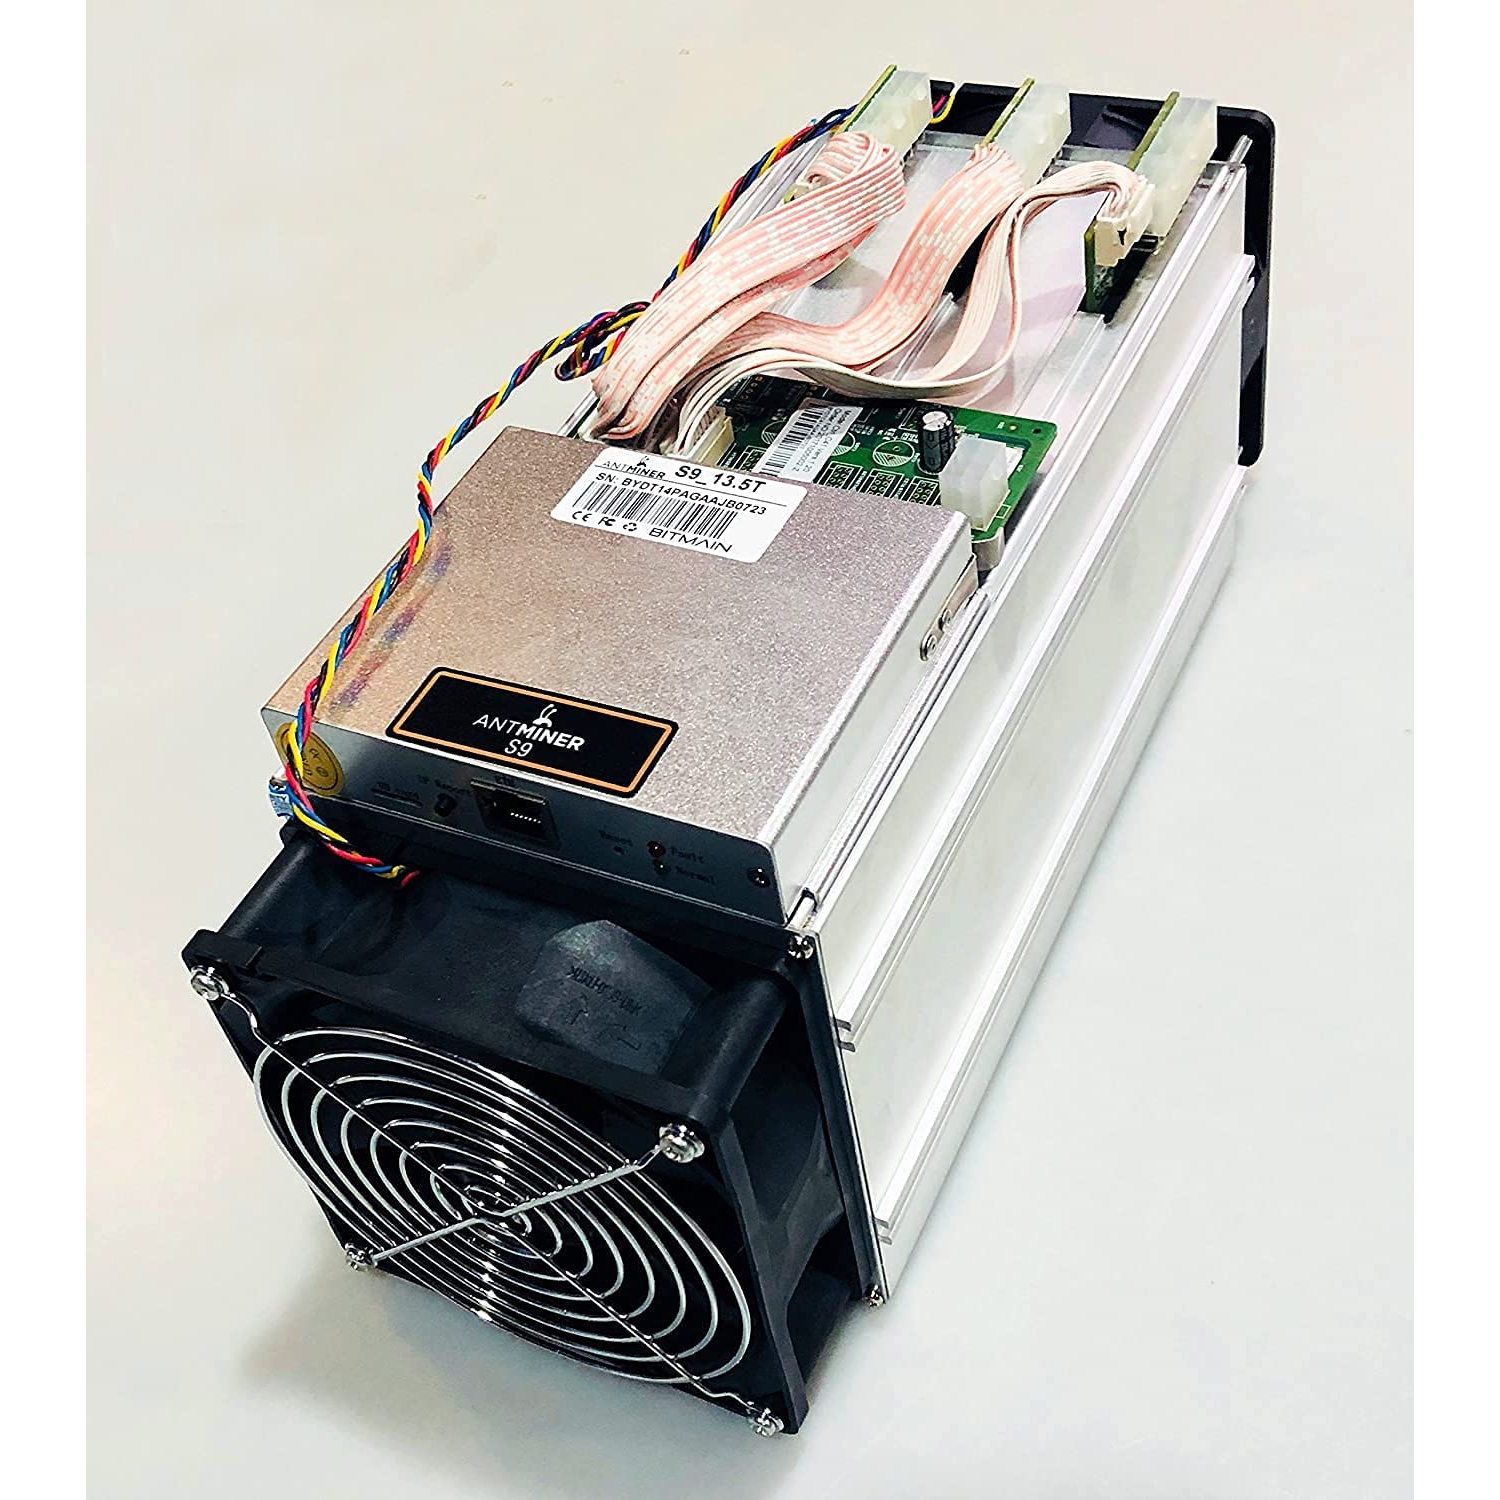 Refurbished (Good) - Bitmain Antminer S9 Bitcoin Miner, 0.098 J/GH Power Efficiency, 13.5TH/s (GENERIC PSU INCLUDED)